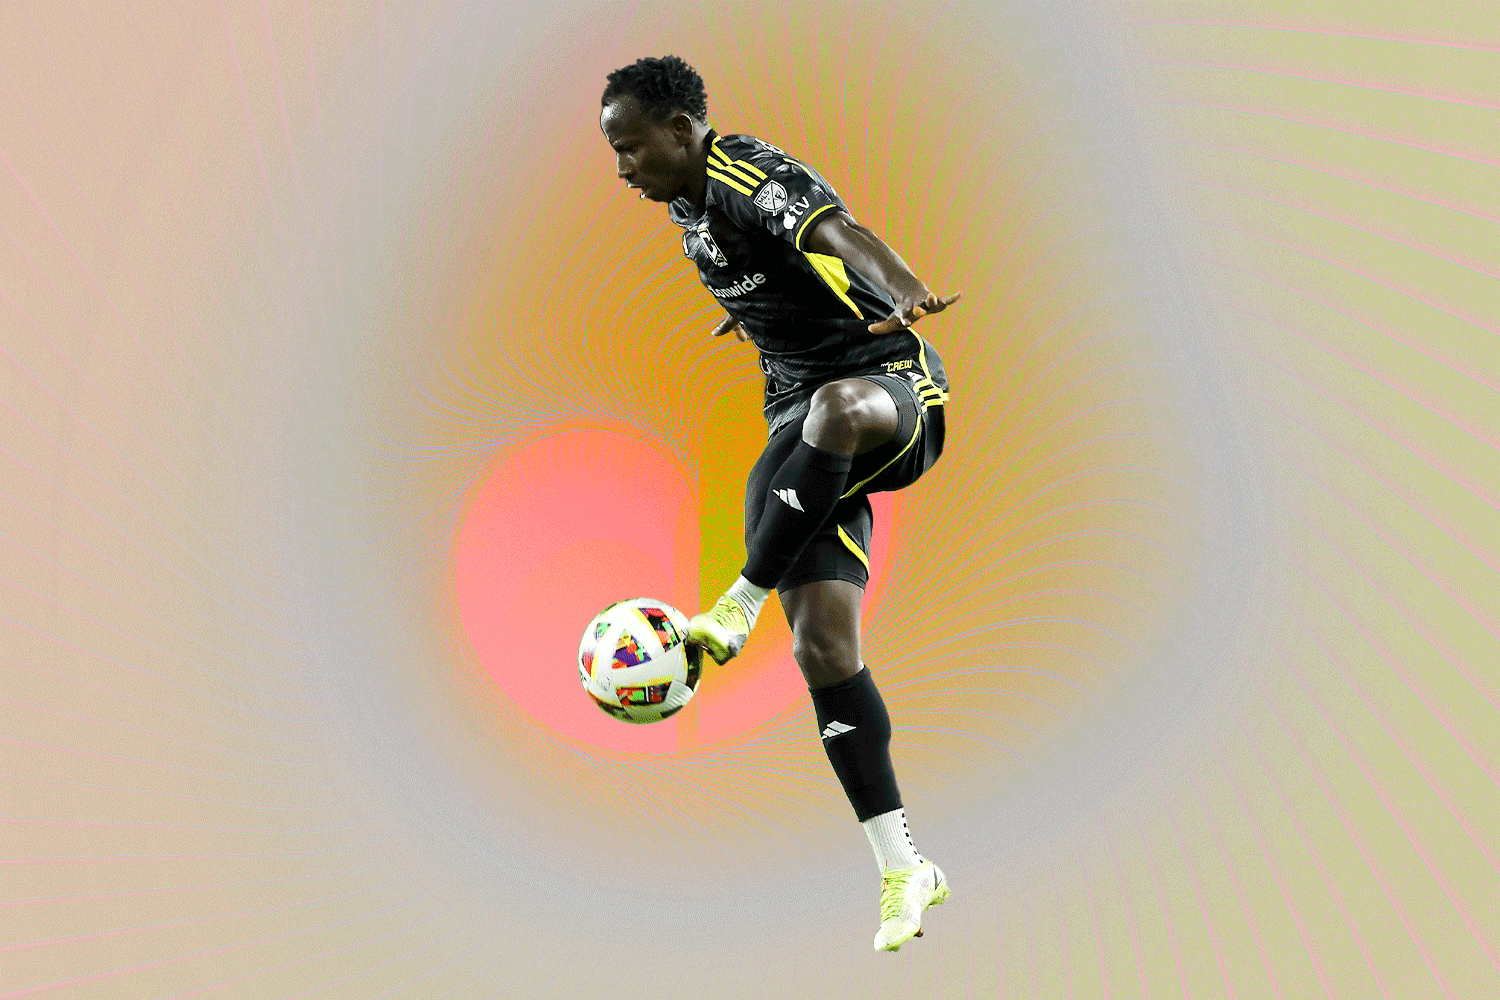 A Columbus Crew player kicking a ball against a trippy background.